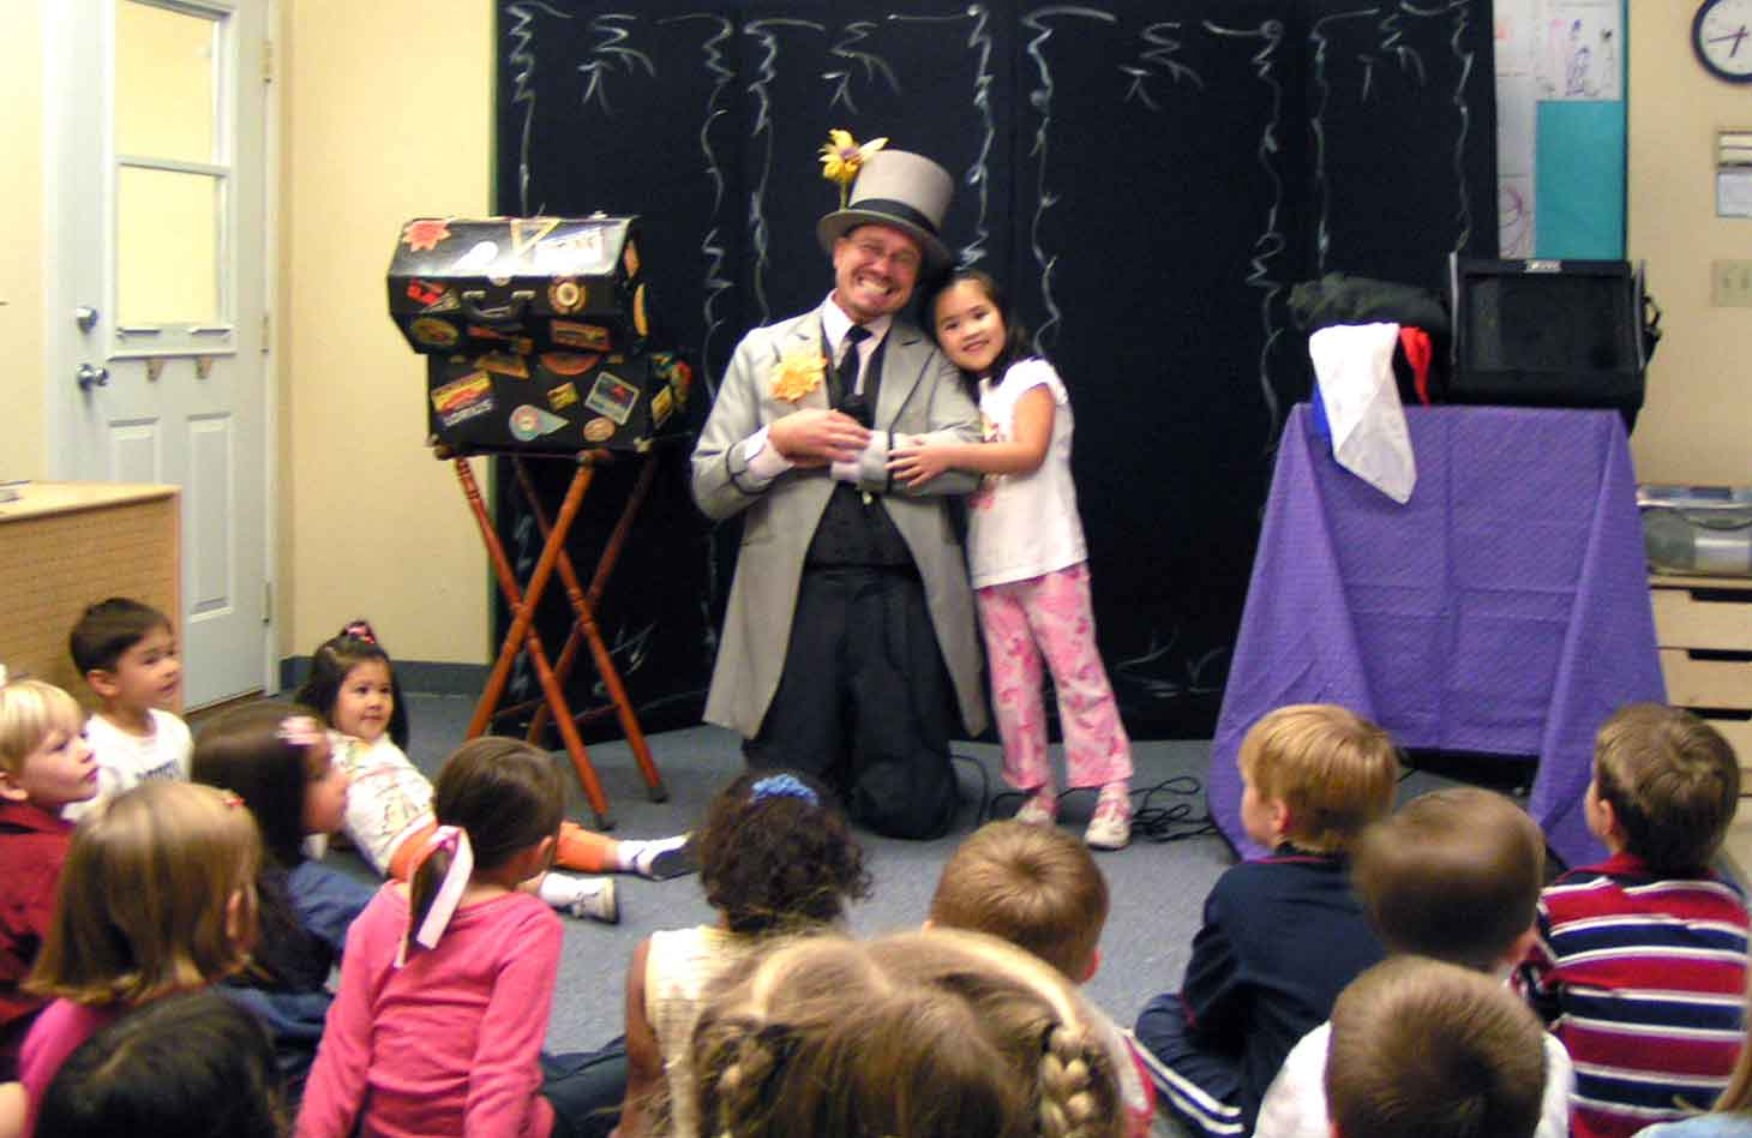 Good Magic Show Is Every Child’s Dream